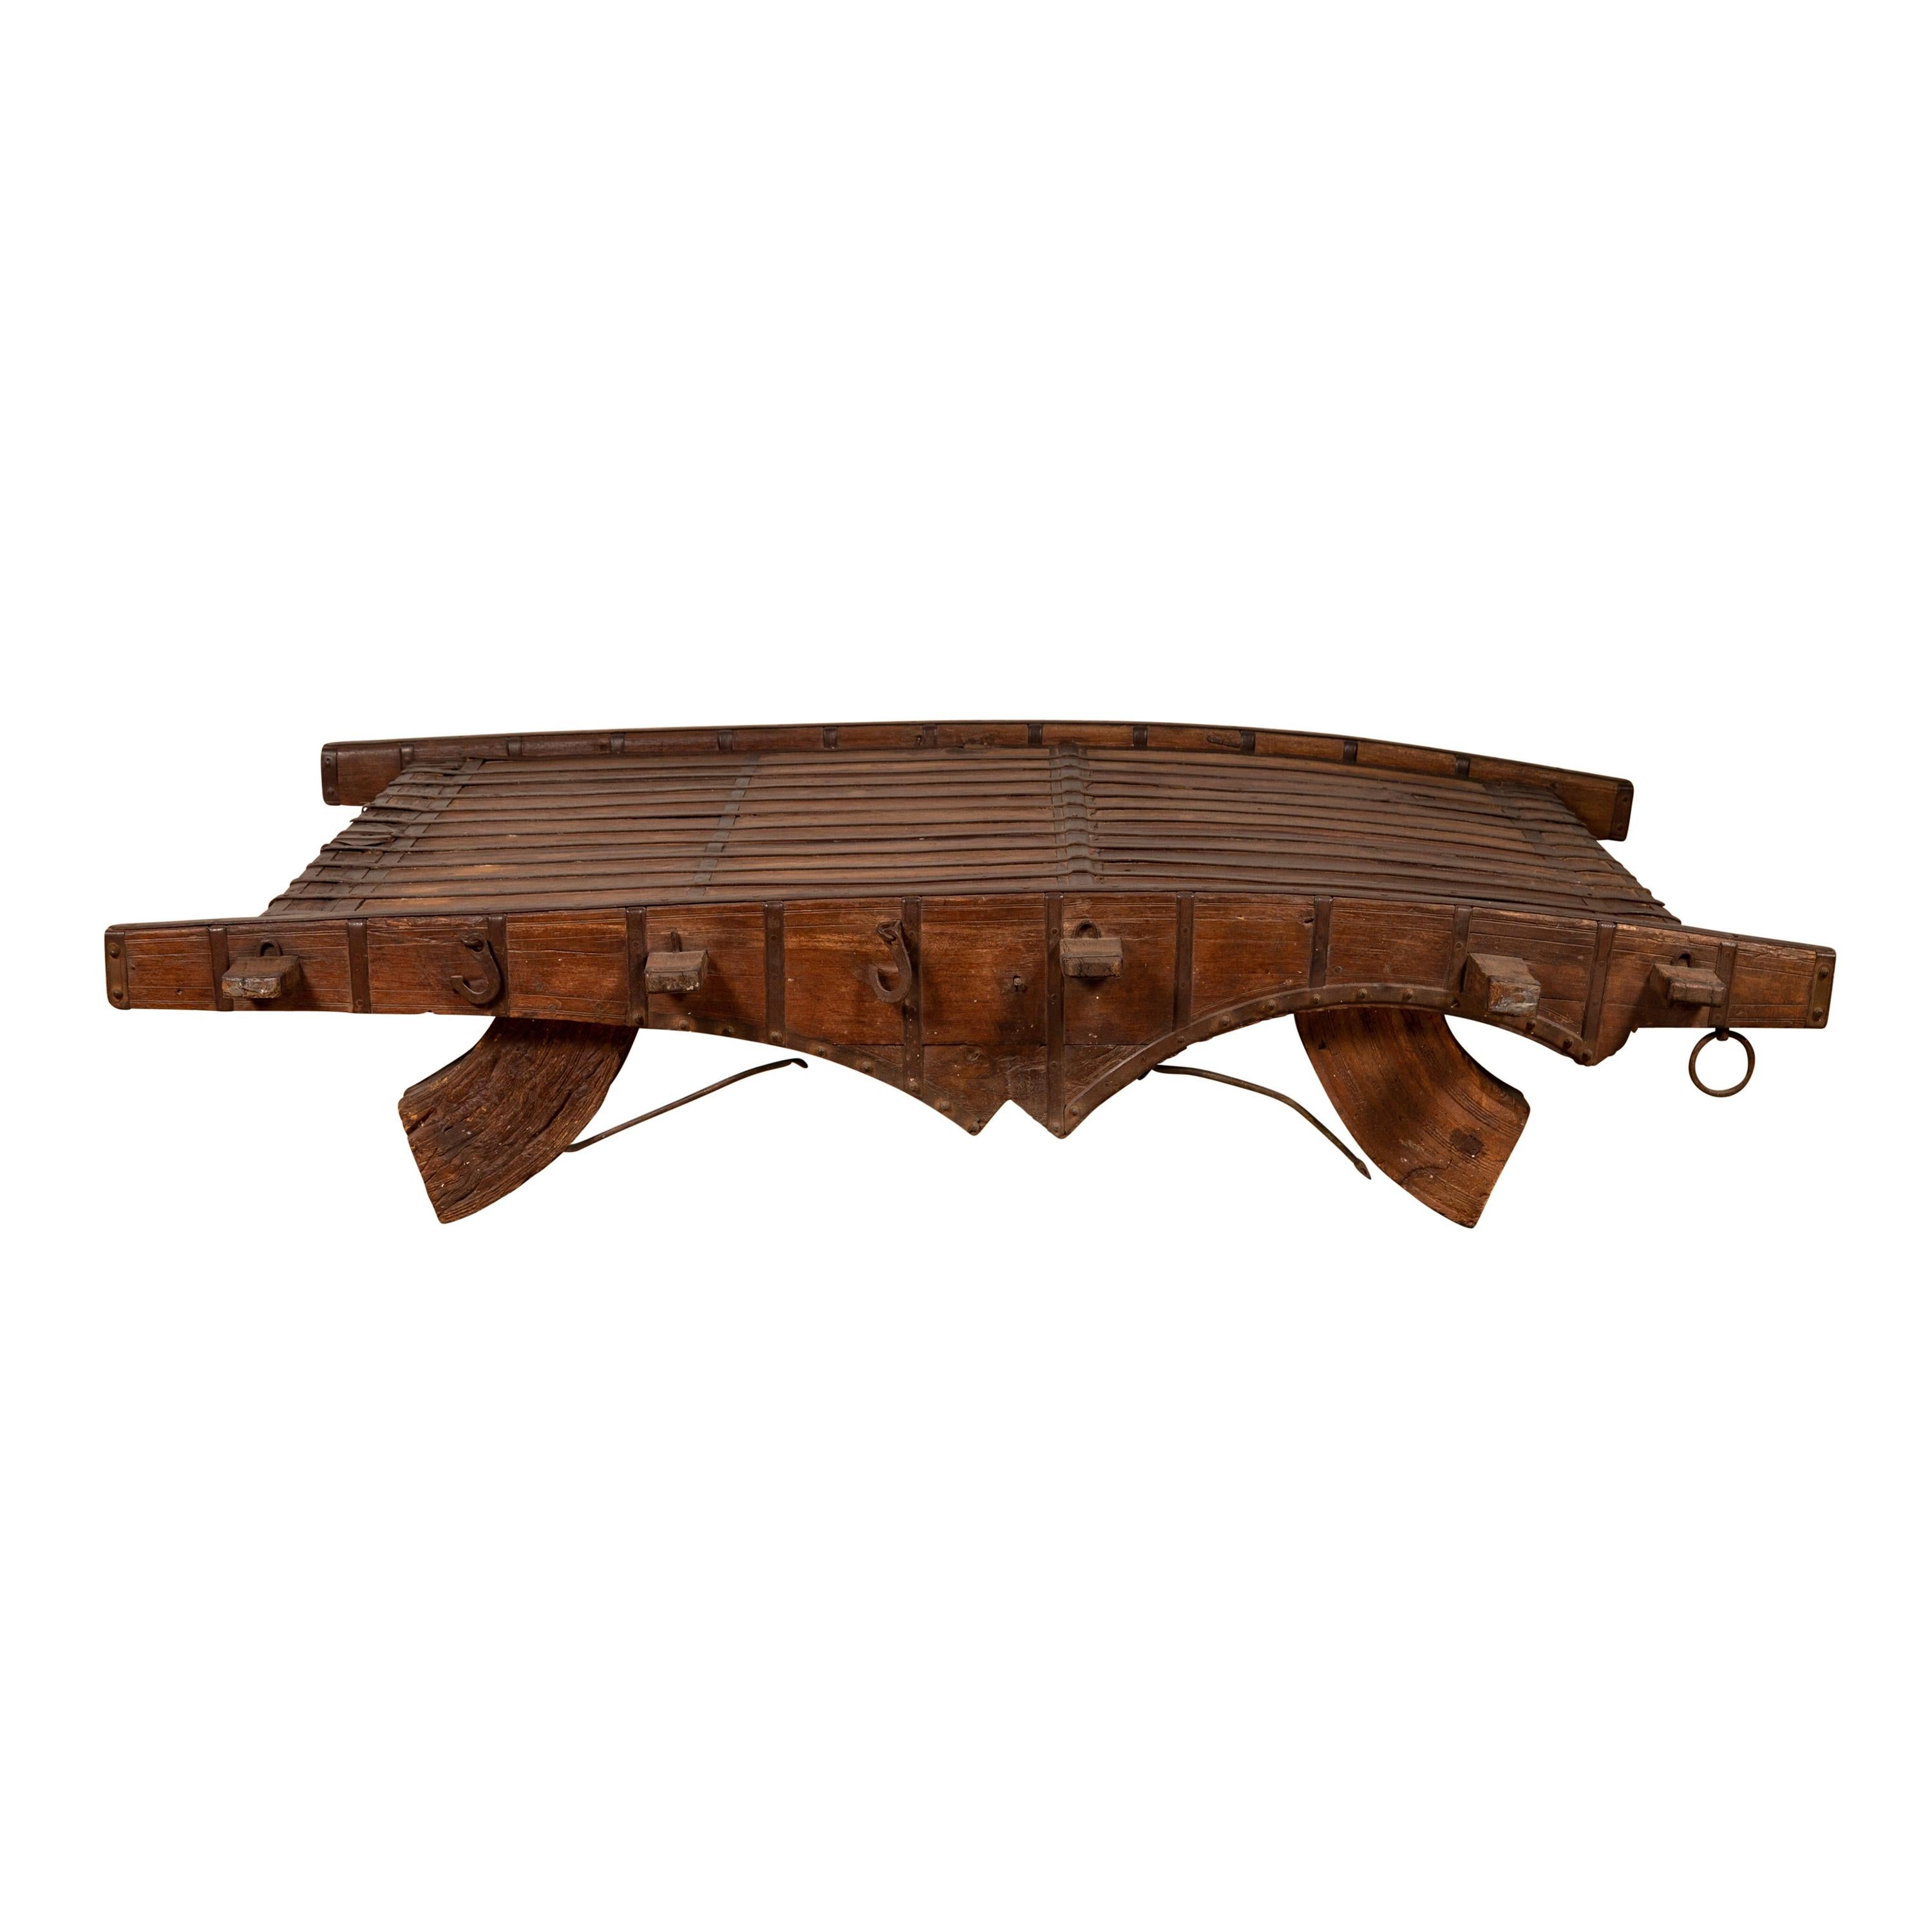 Indian Rustic Antique Wooden Ox Cart with Metal Accents Made into a Coffee Table